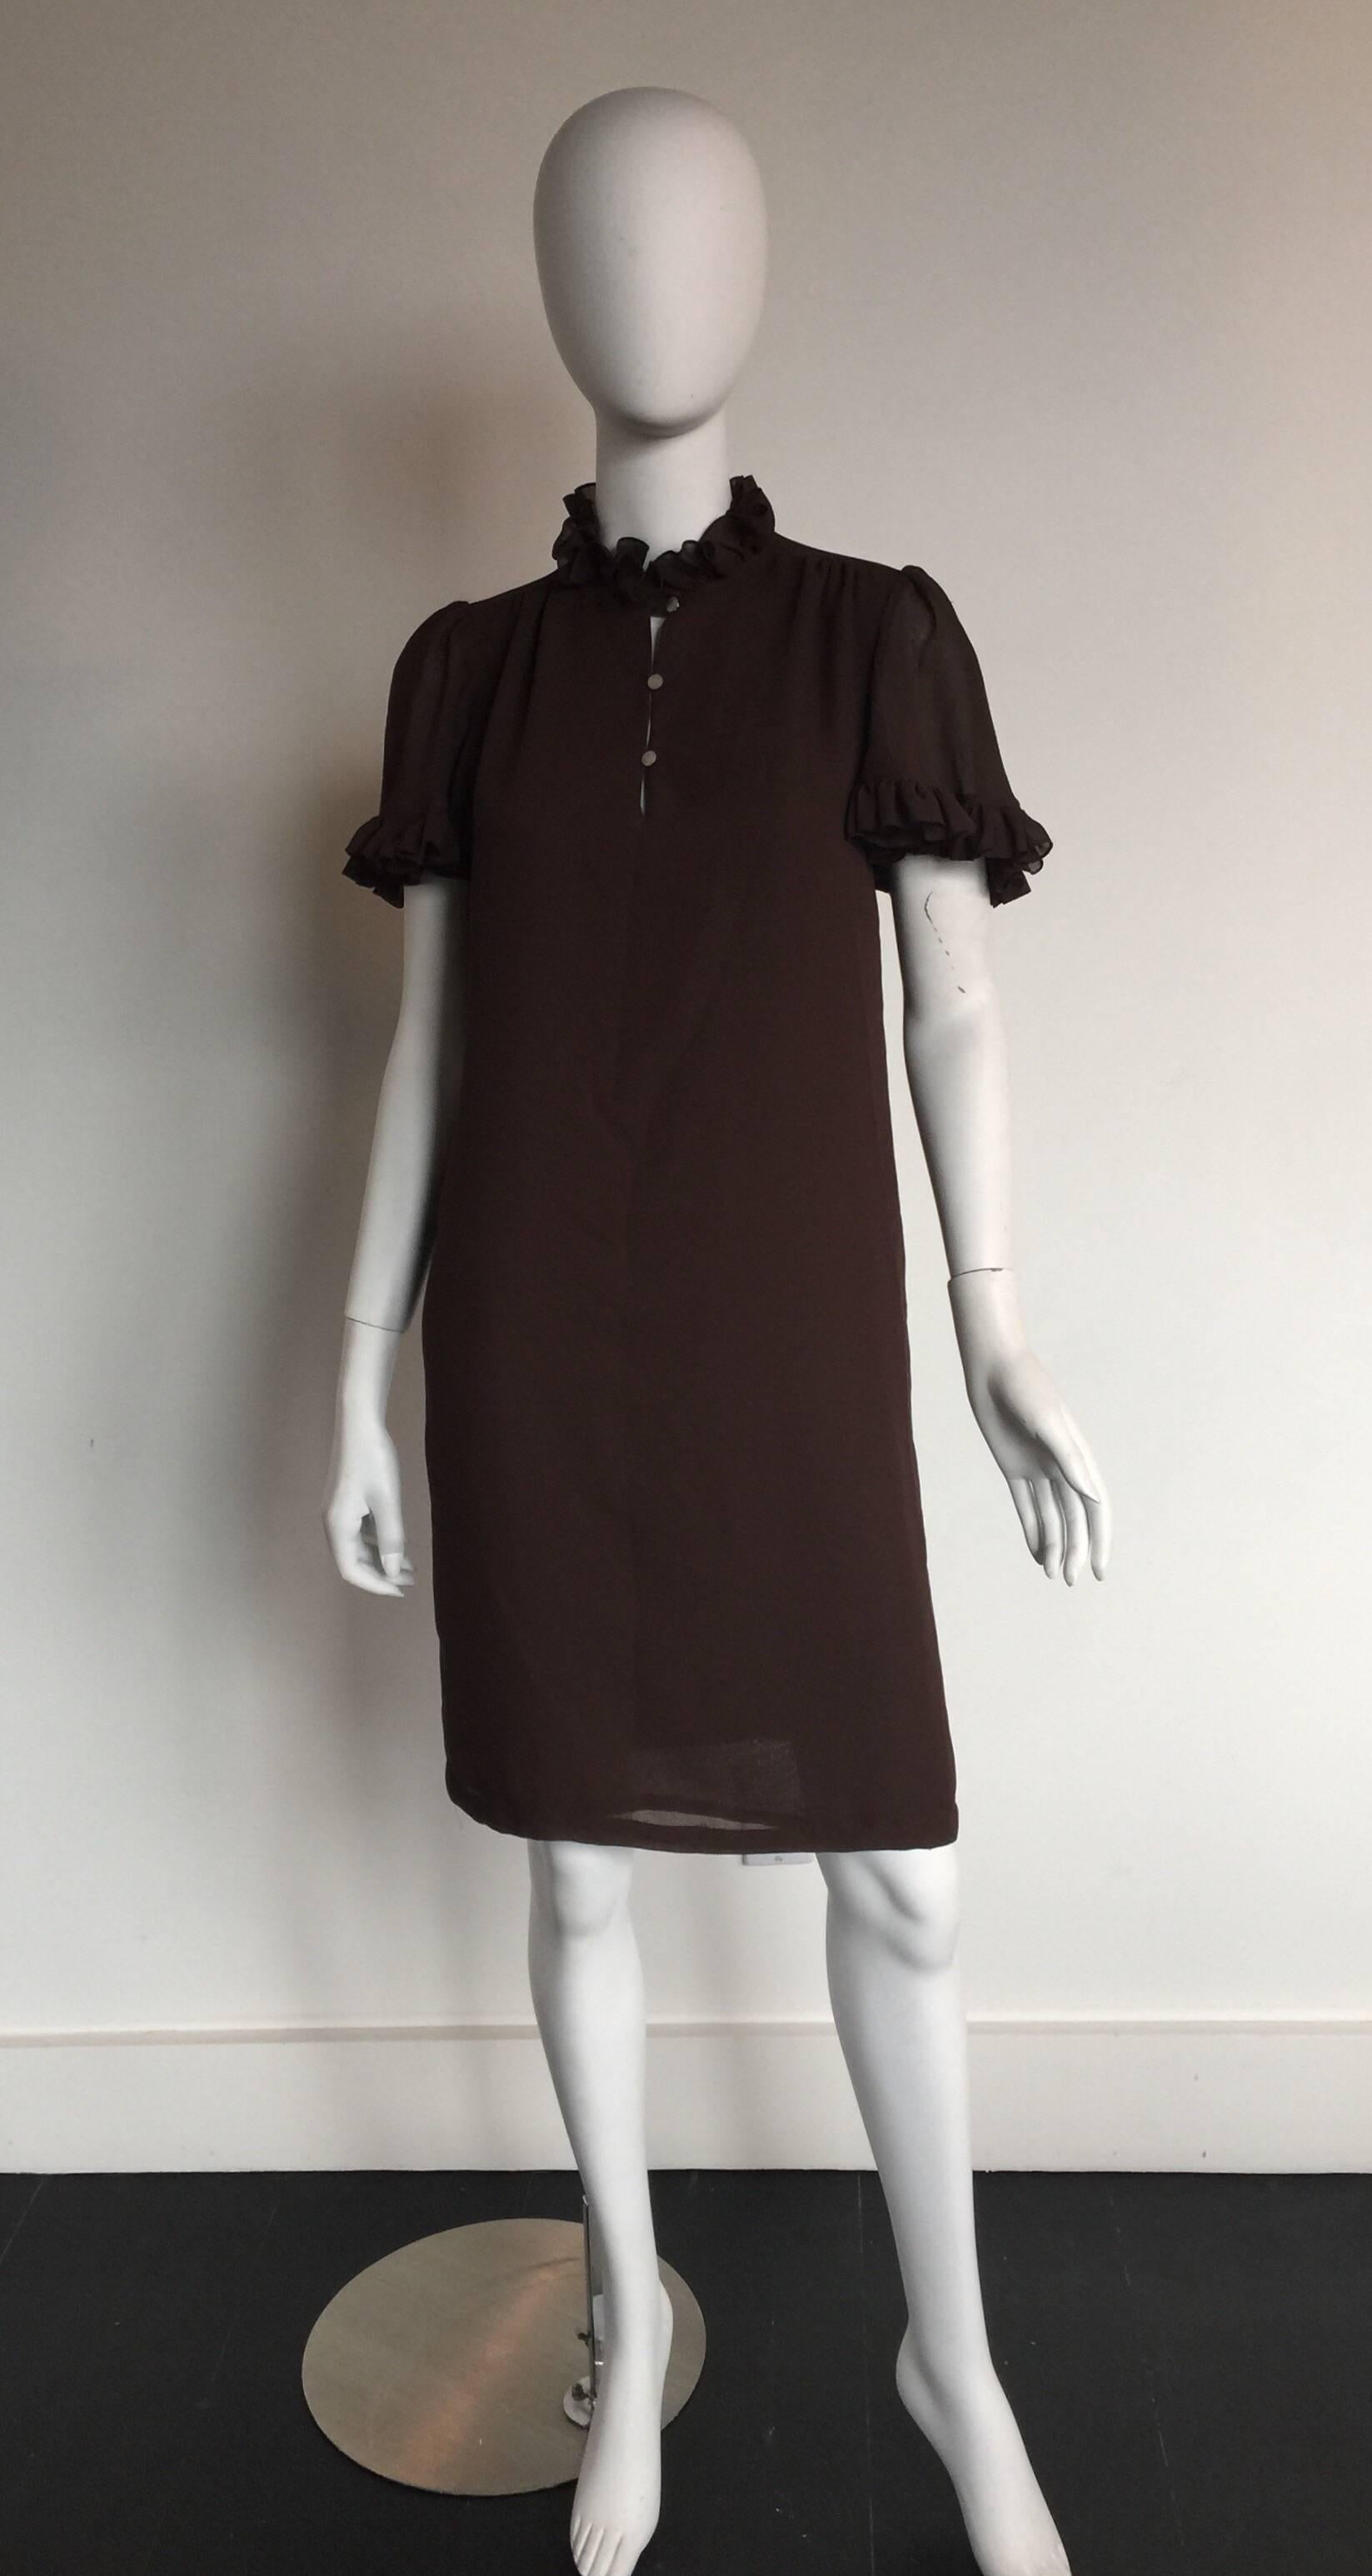 This Mr. Blackwell chocolate brown ruffle sleeve dress is from the 1970s.  It has three buttons in the front and has a babydoll cut.  It has an original Bullocks Wilshire from the LA boutique.  It has a forgiving cut so can fit a S/M.  
